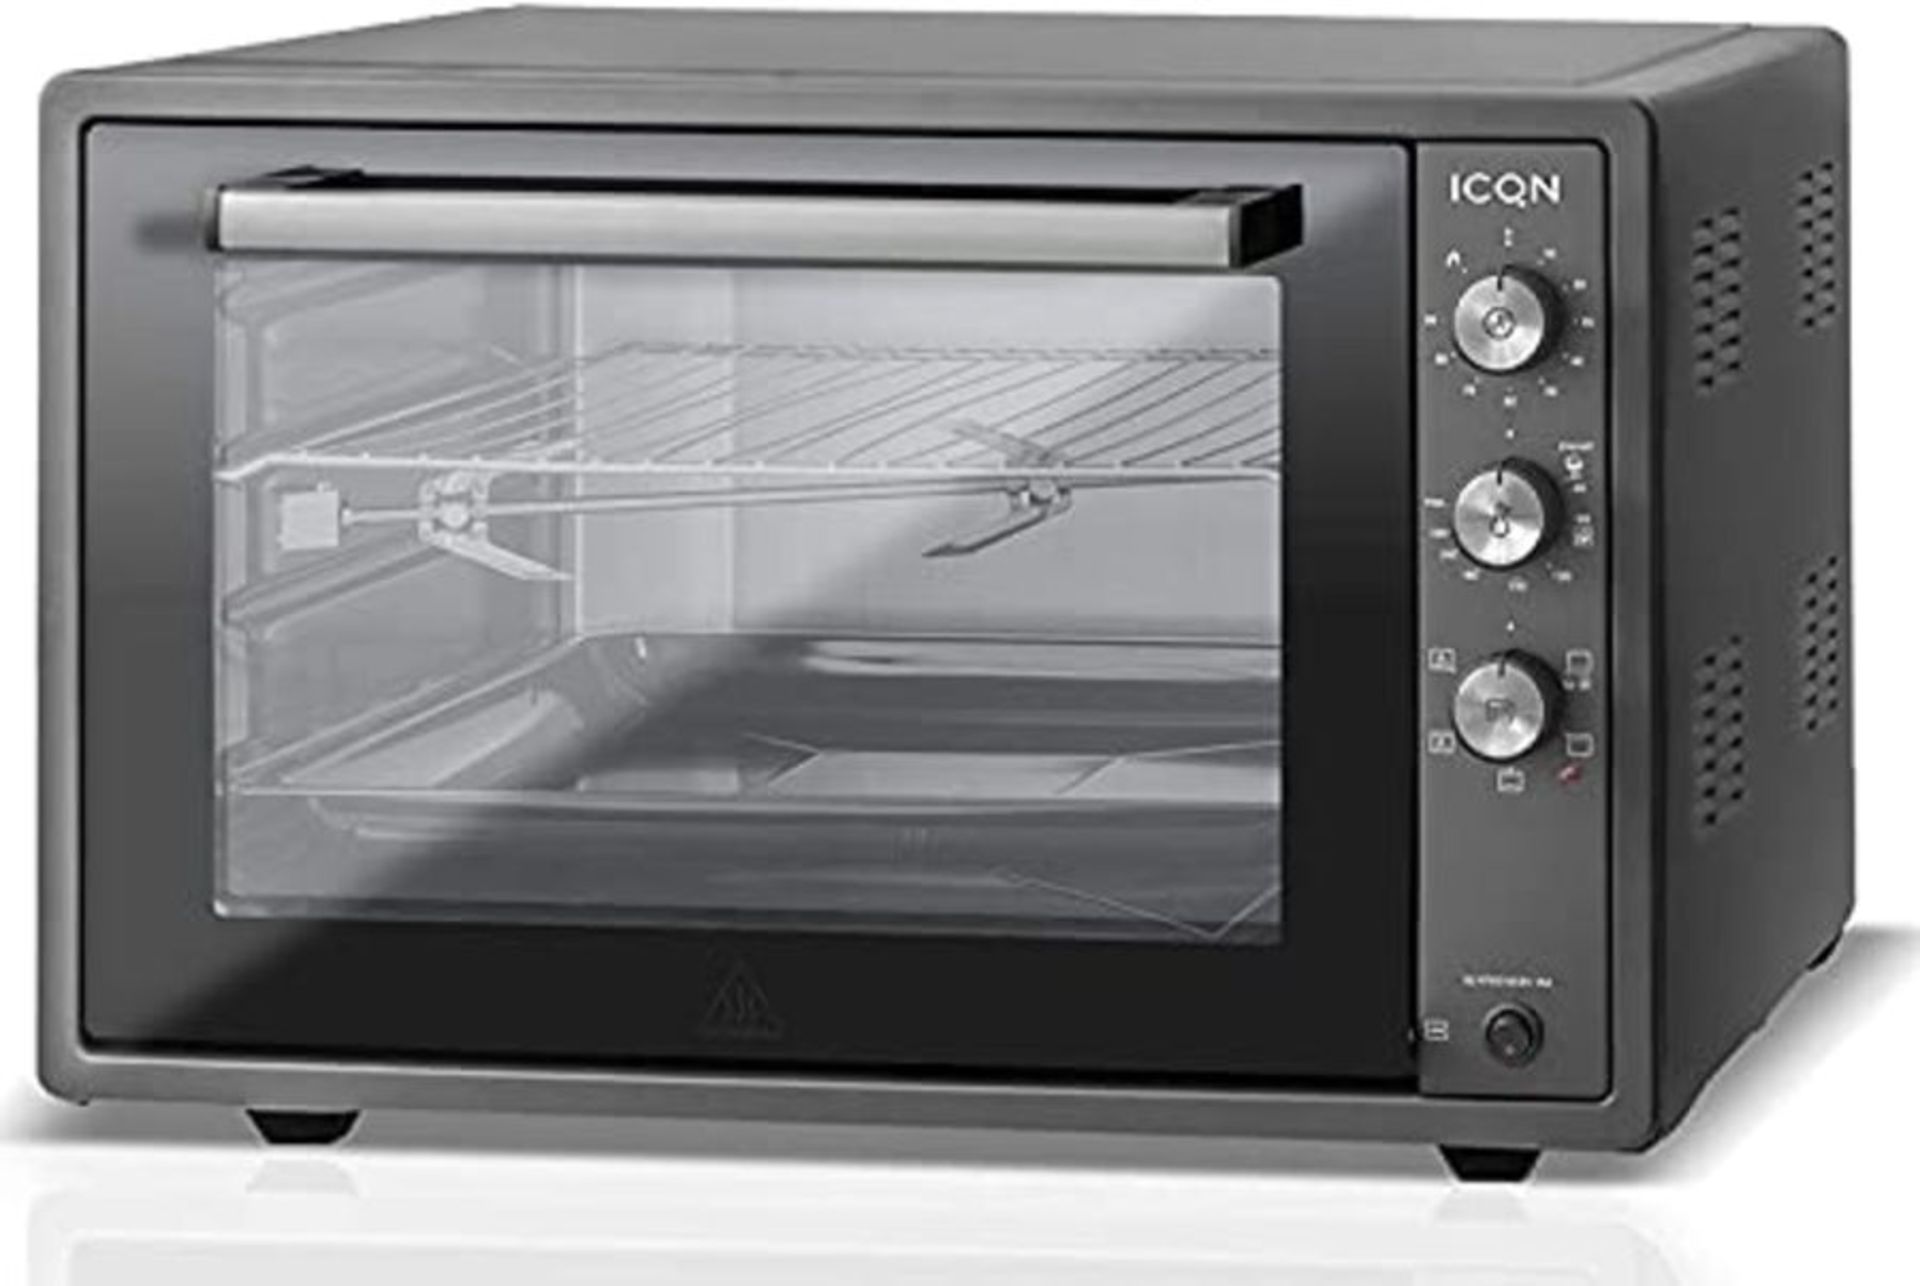 RRP £125.00 ICQN 60 liter XXL mini oven | 1800 W | Circulating air | Pizza oven | Double glazing |